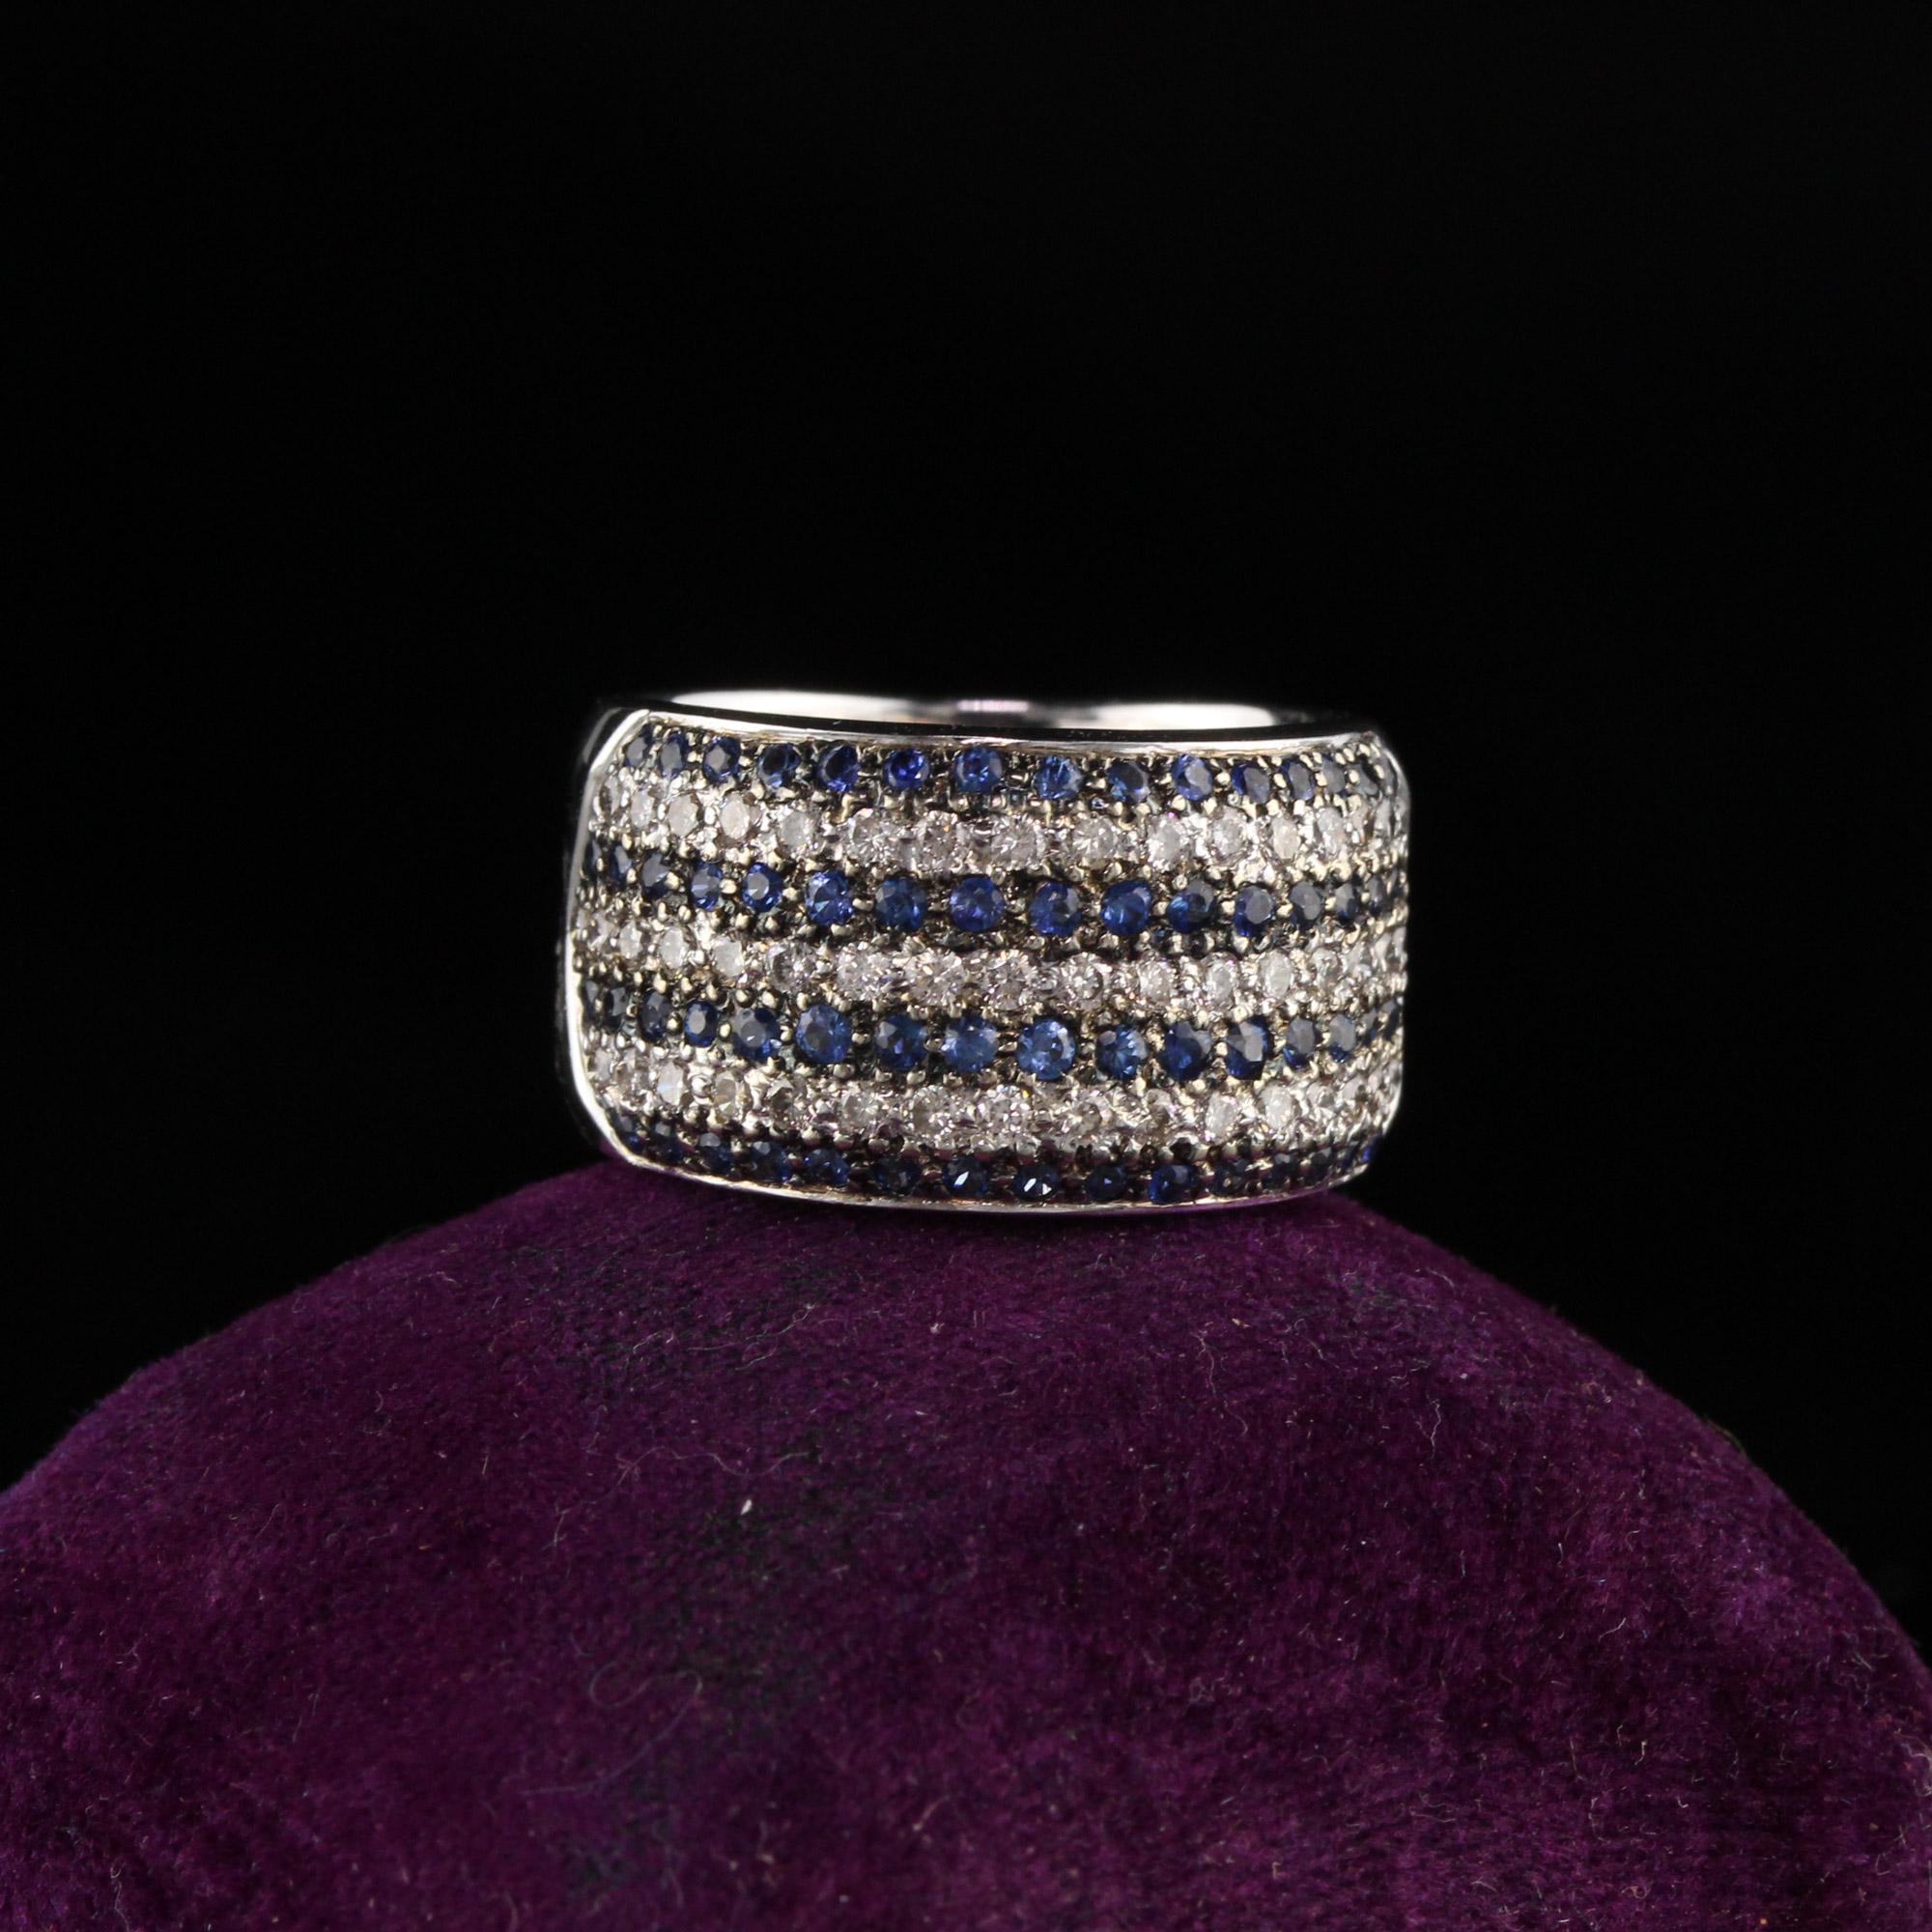 Beautiful 14K White Gold wide band with 7 rows of alternating diamonds and blue sapphire. Perfect for day to night!

Metal: 14K White Gold

Weight: 12.6 Grams

Diamond Weight: Approximately 0.50 cts

Diamond Color: I

Diamond Clarity: SI2

Sapphire